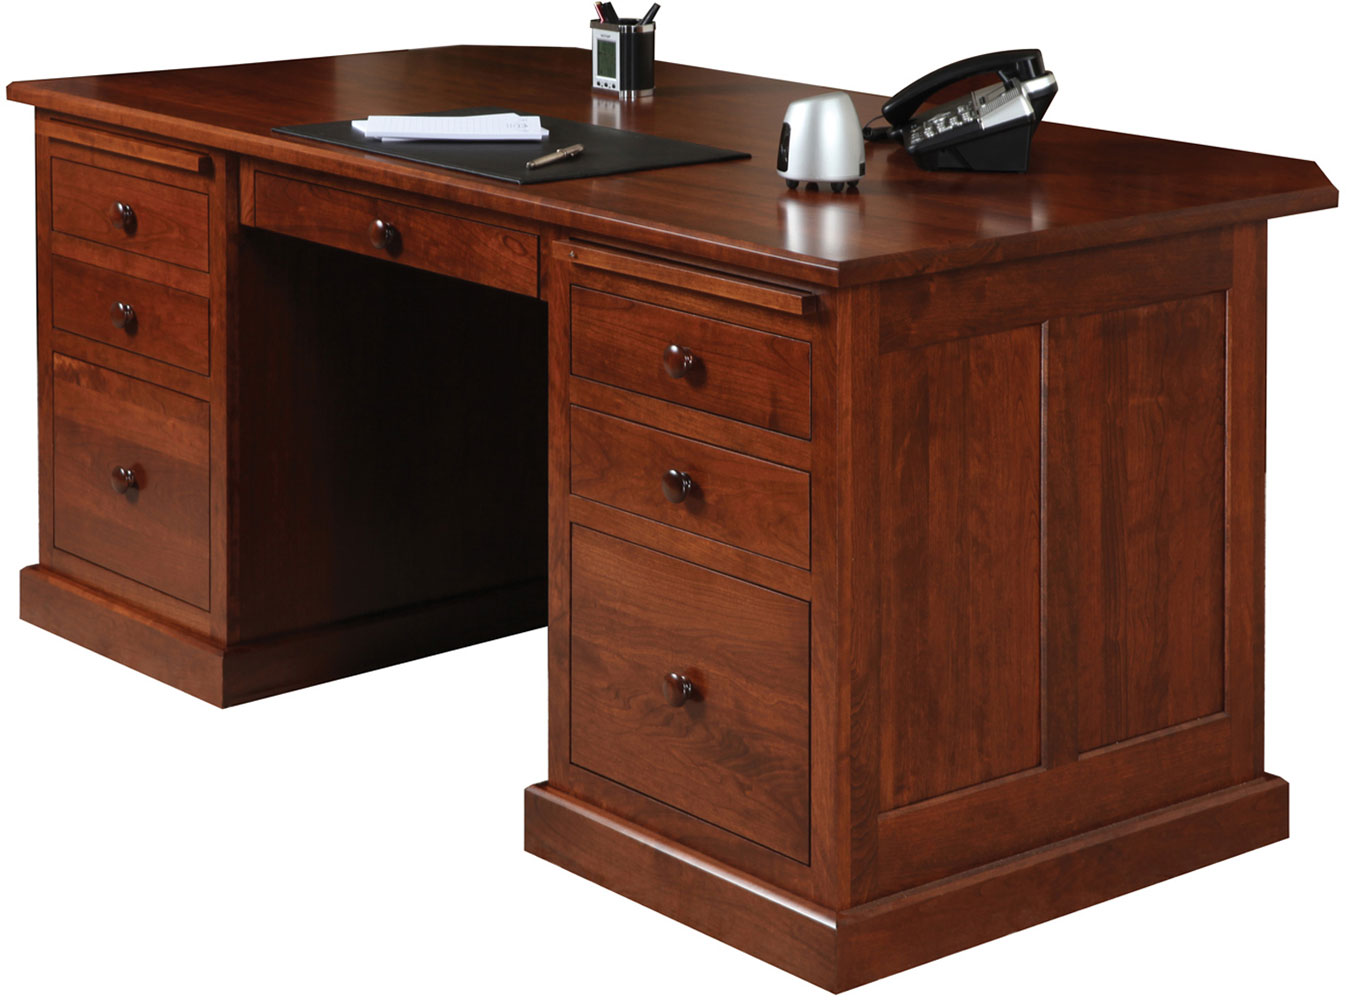 Homestead Series Executive Desk shown in Cherry Wood with OCS Boston Stain.